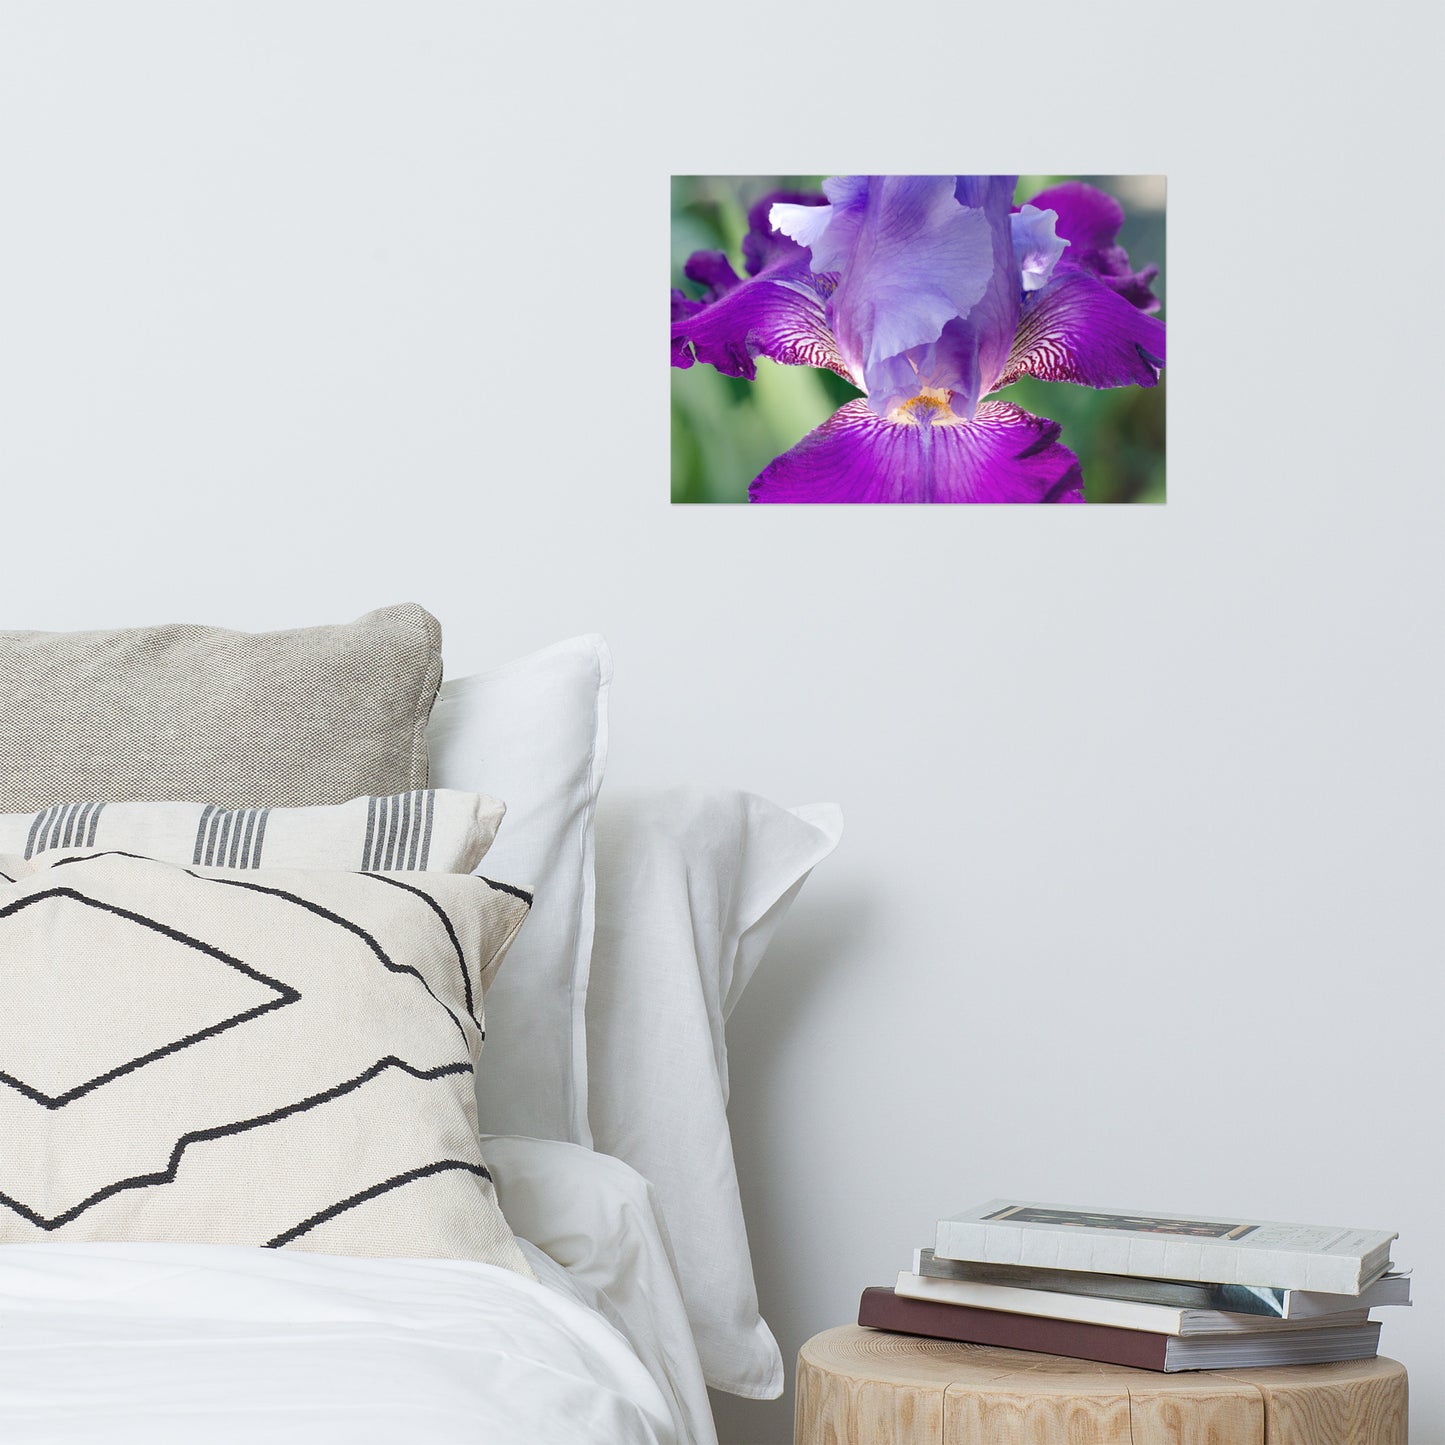 Large Room Posters: Glowing Iris - Botanical / Floral / Flora / Flowers / Nature Photograph - Loose / Frameable / Unframed / Frameless Wall Art Print - Artwork